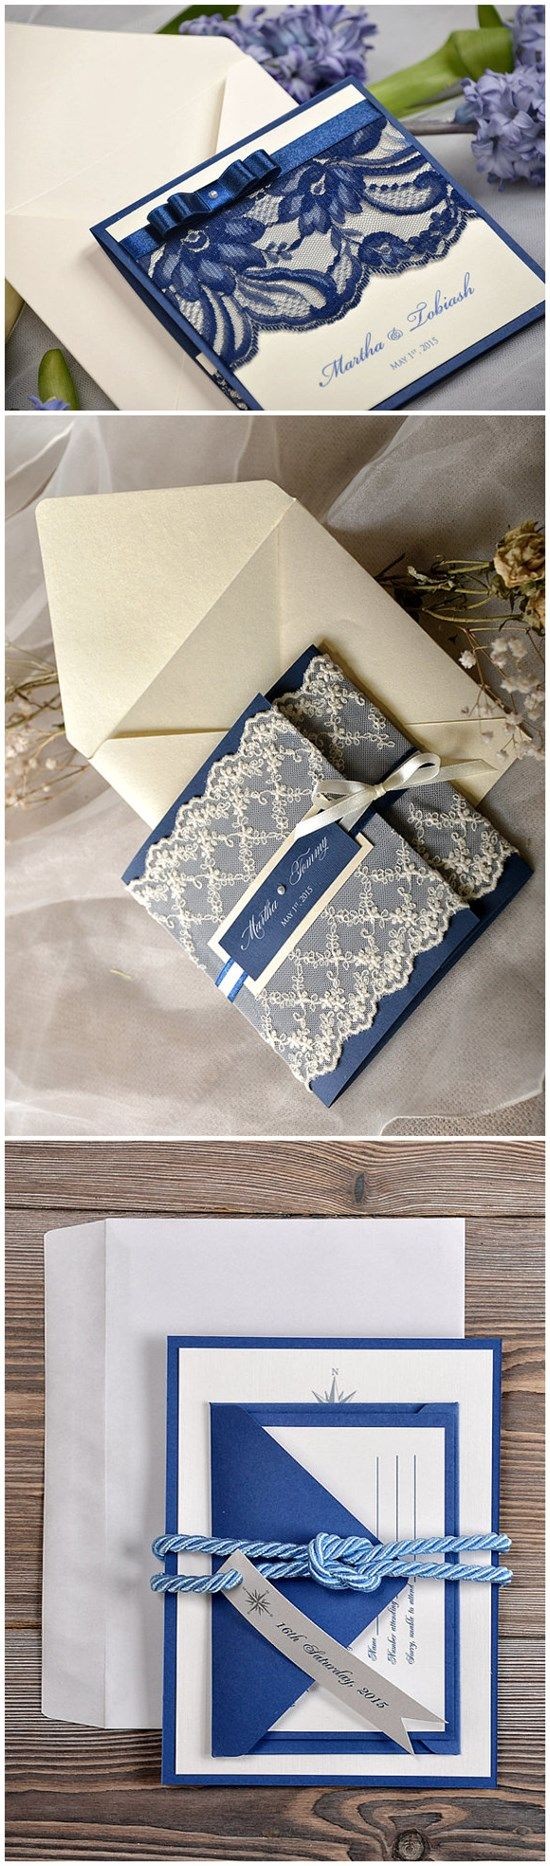 Blue Vintage Lace Wedding Invitations from etsy